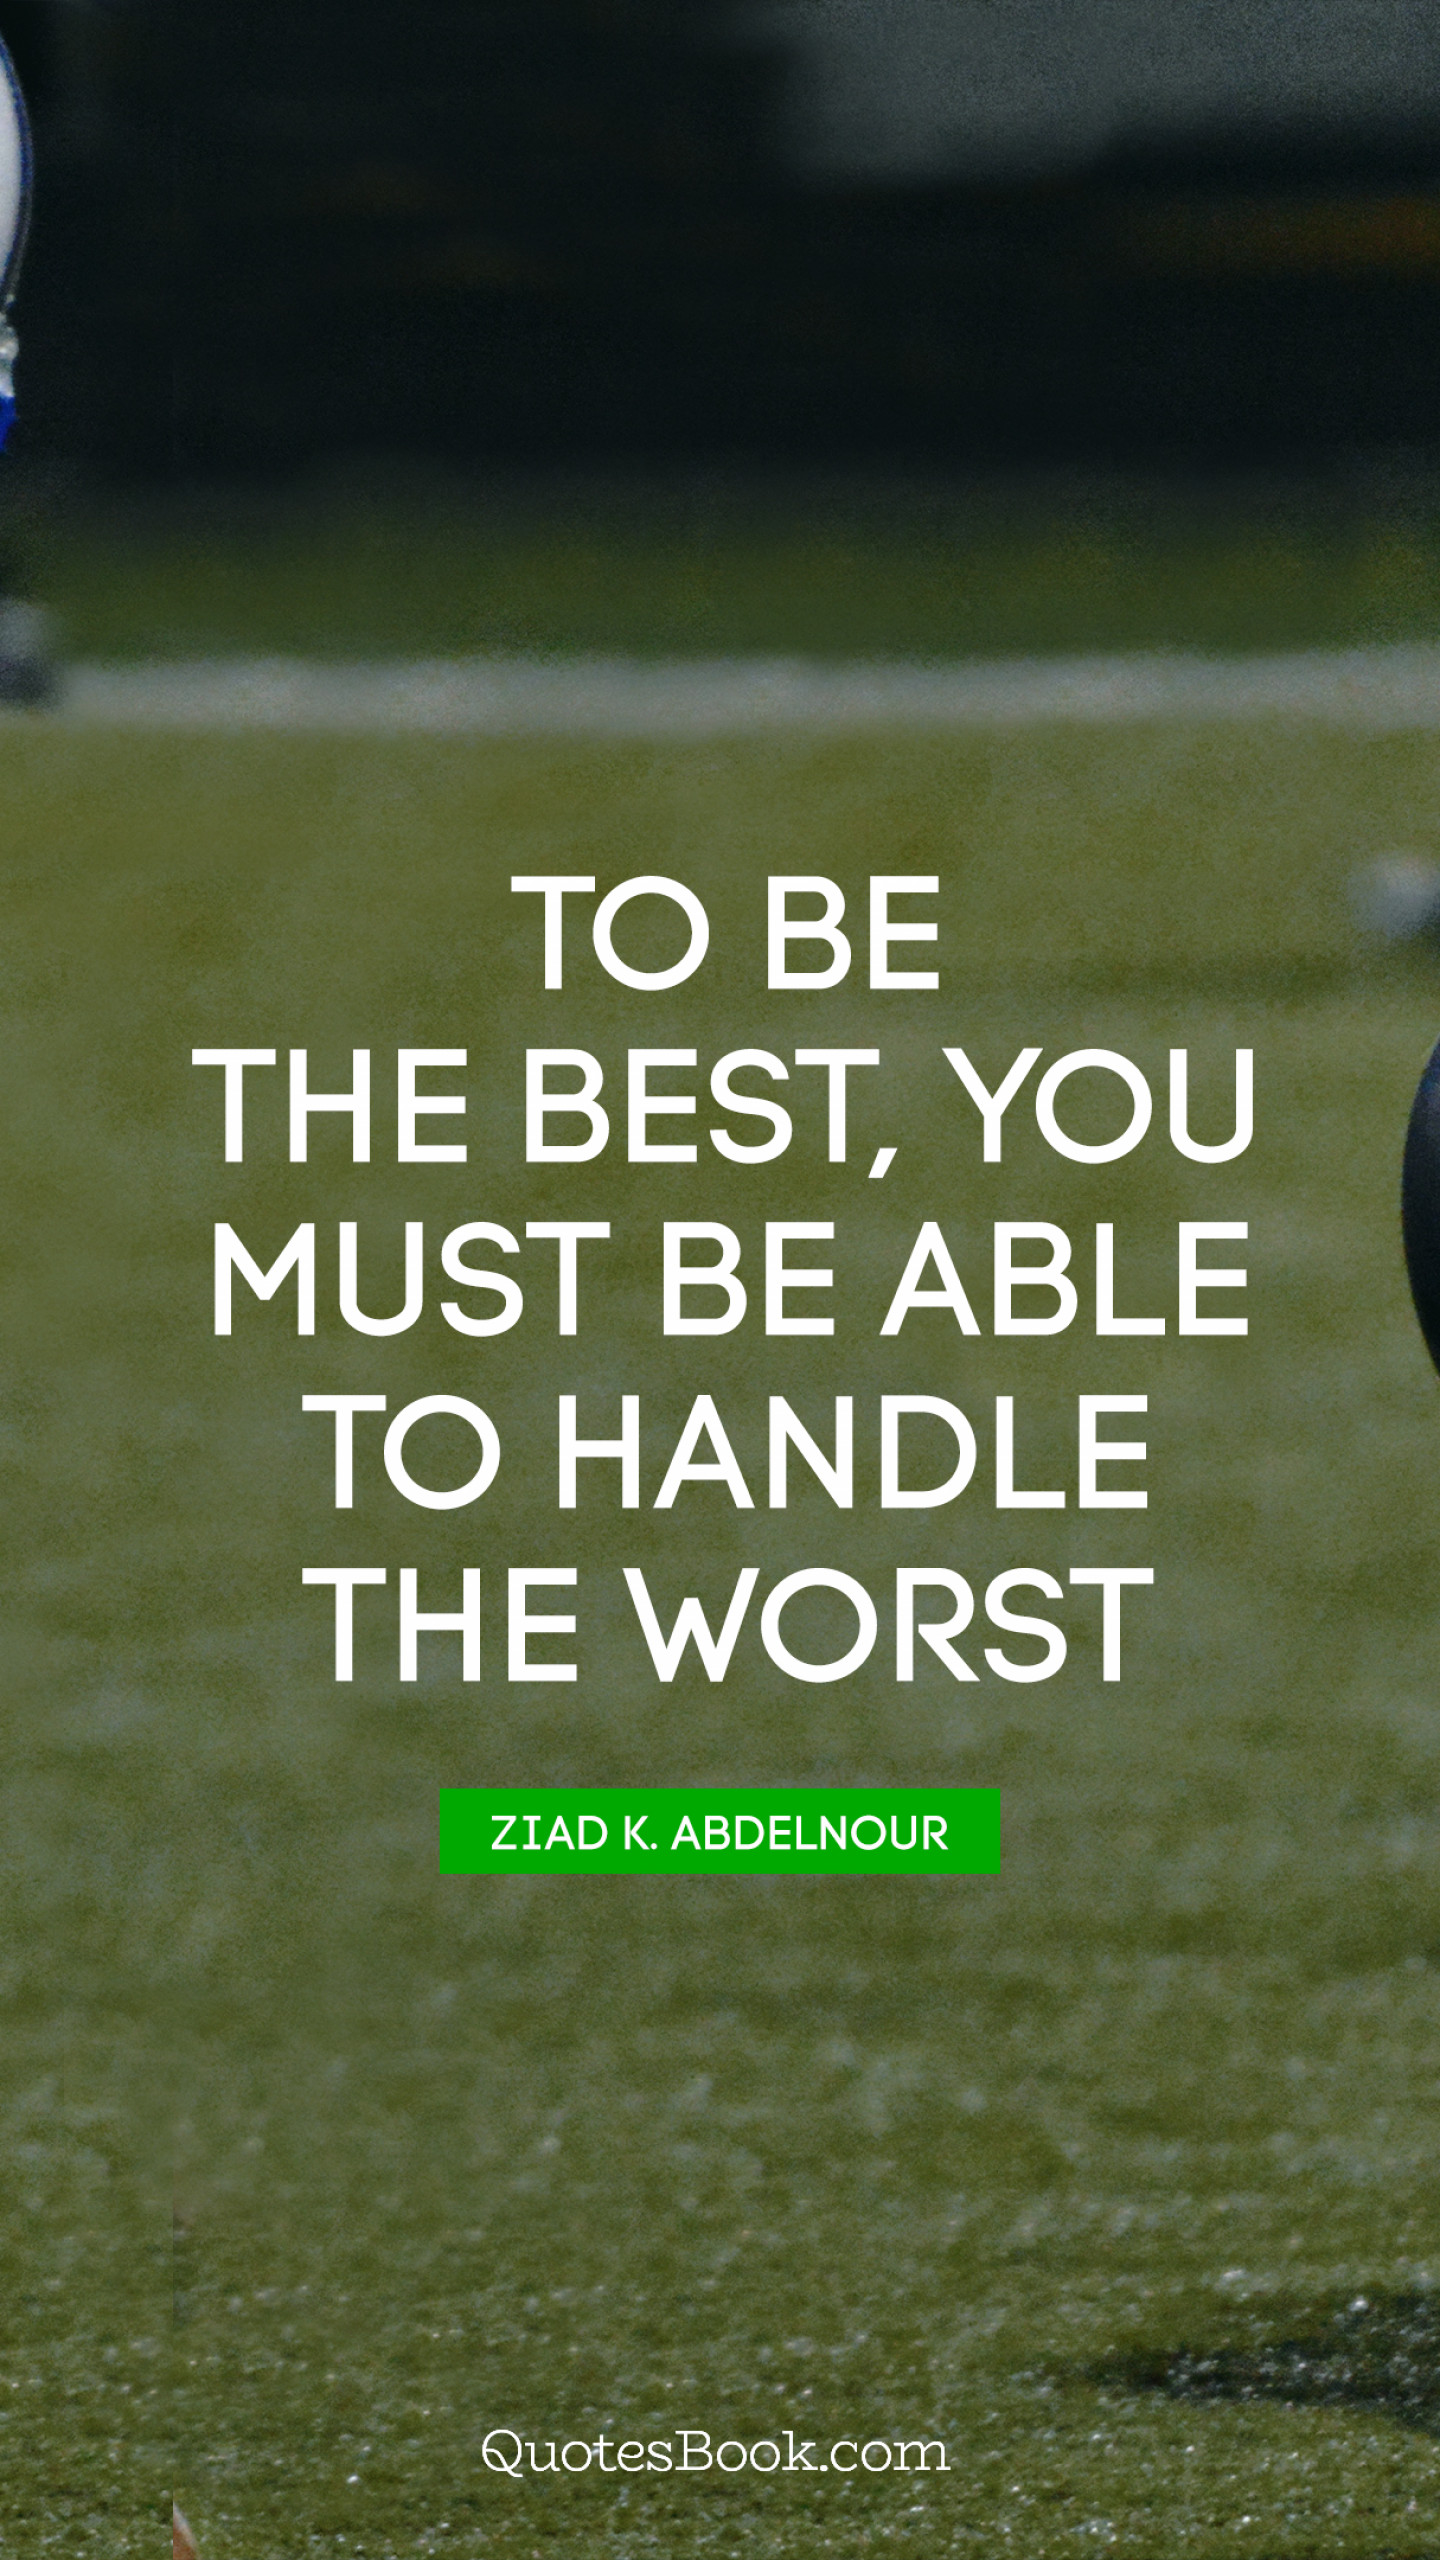 To be the best, you must be able to handle the worst. - Quote by Ziad K